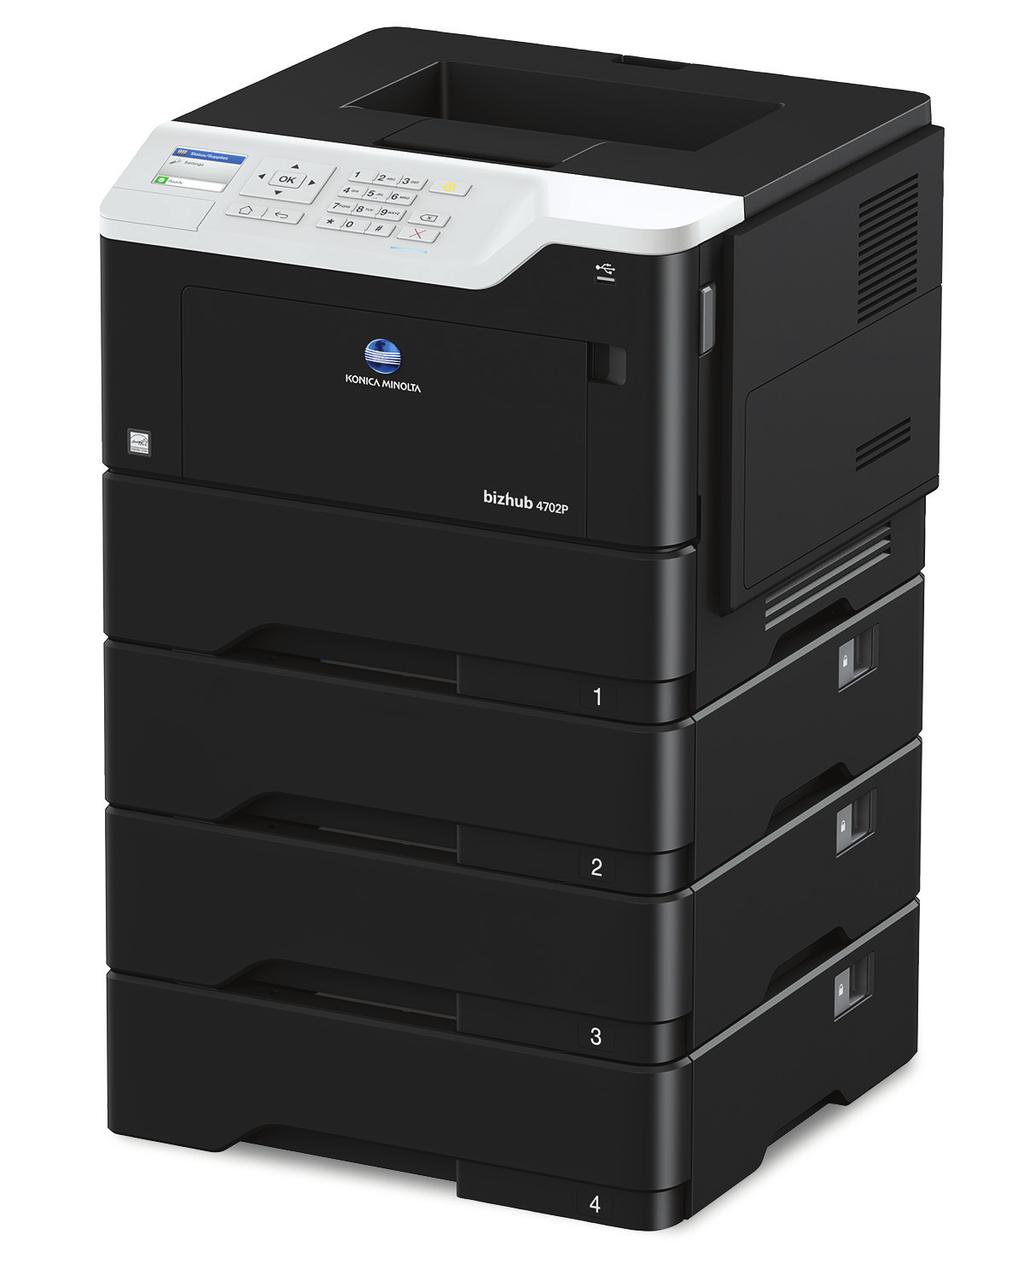 How to Build a System (from start to finish) Step 1: Base Unit bizhub 4702P Electrophotographic Laser Printer Includes PCL6, PostScript 3 and XPS, Automatic Duplex Printing, 512 MB Standard Memory,